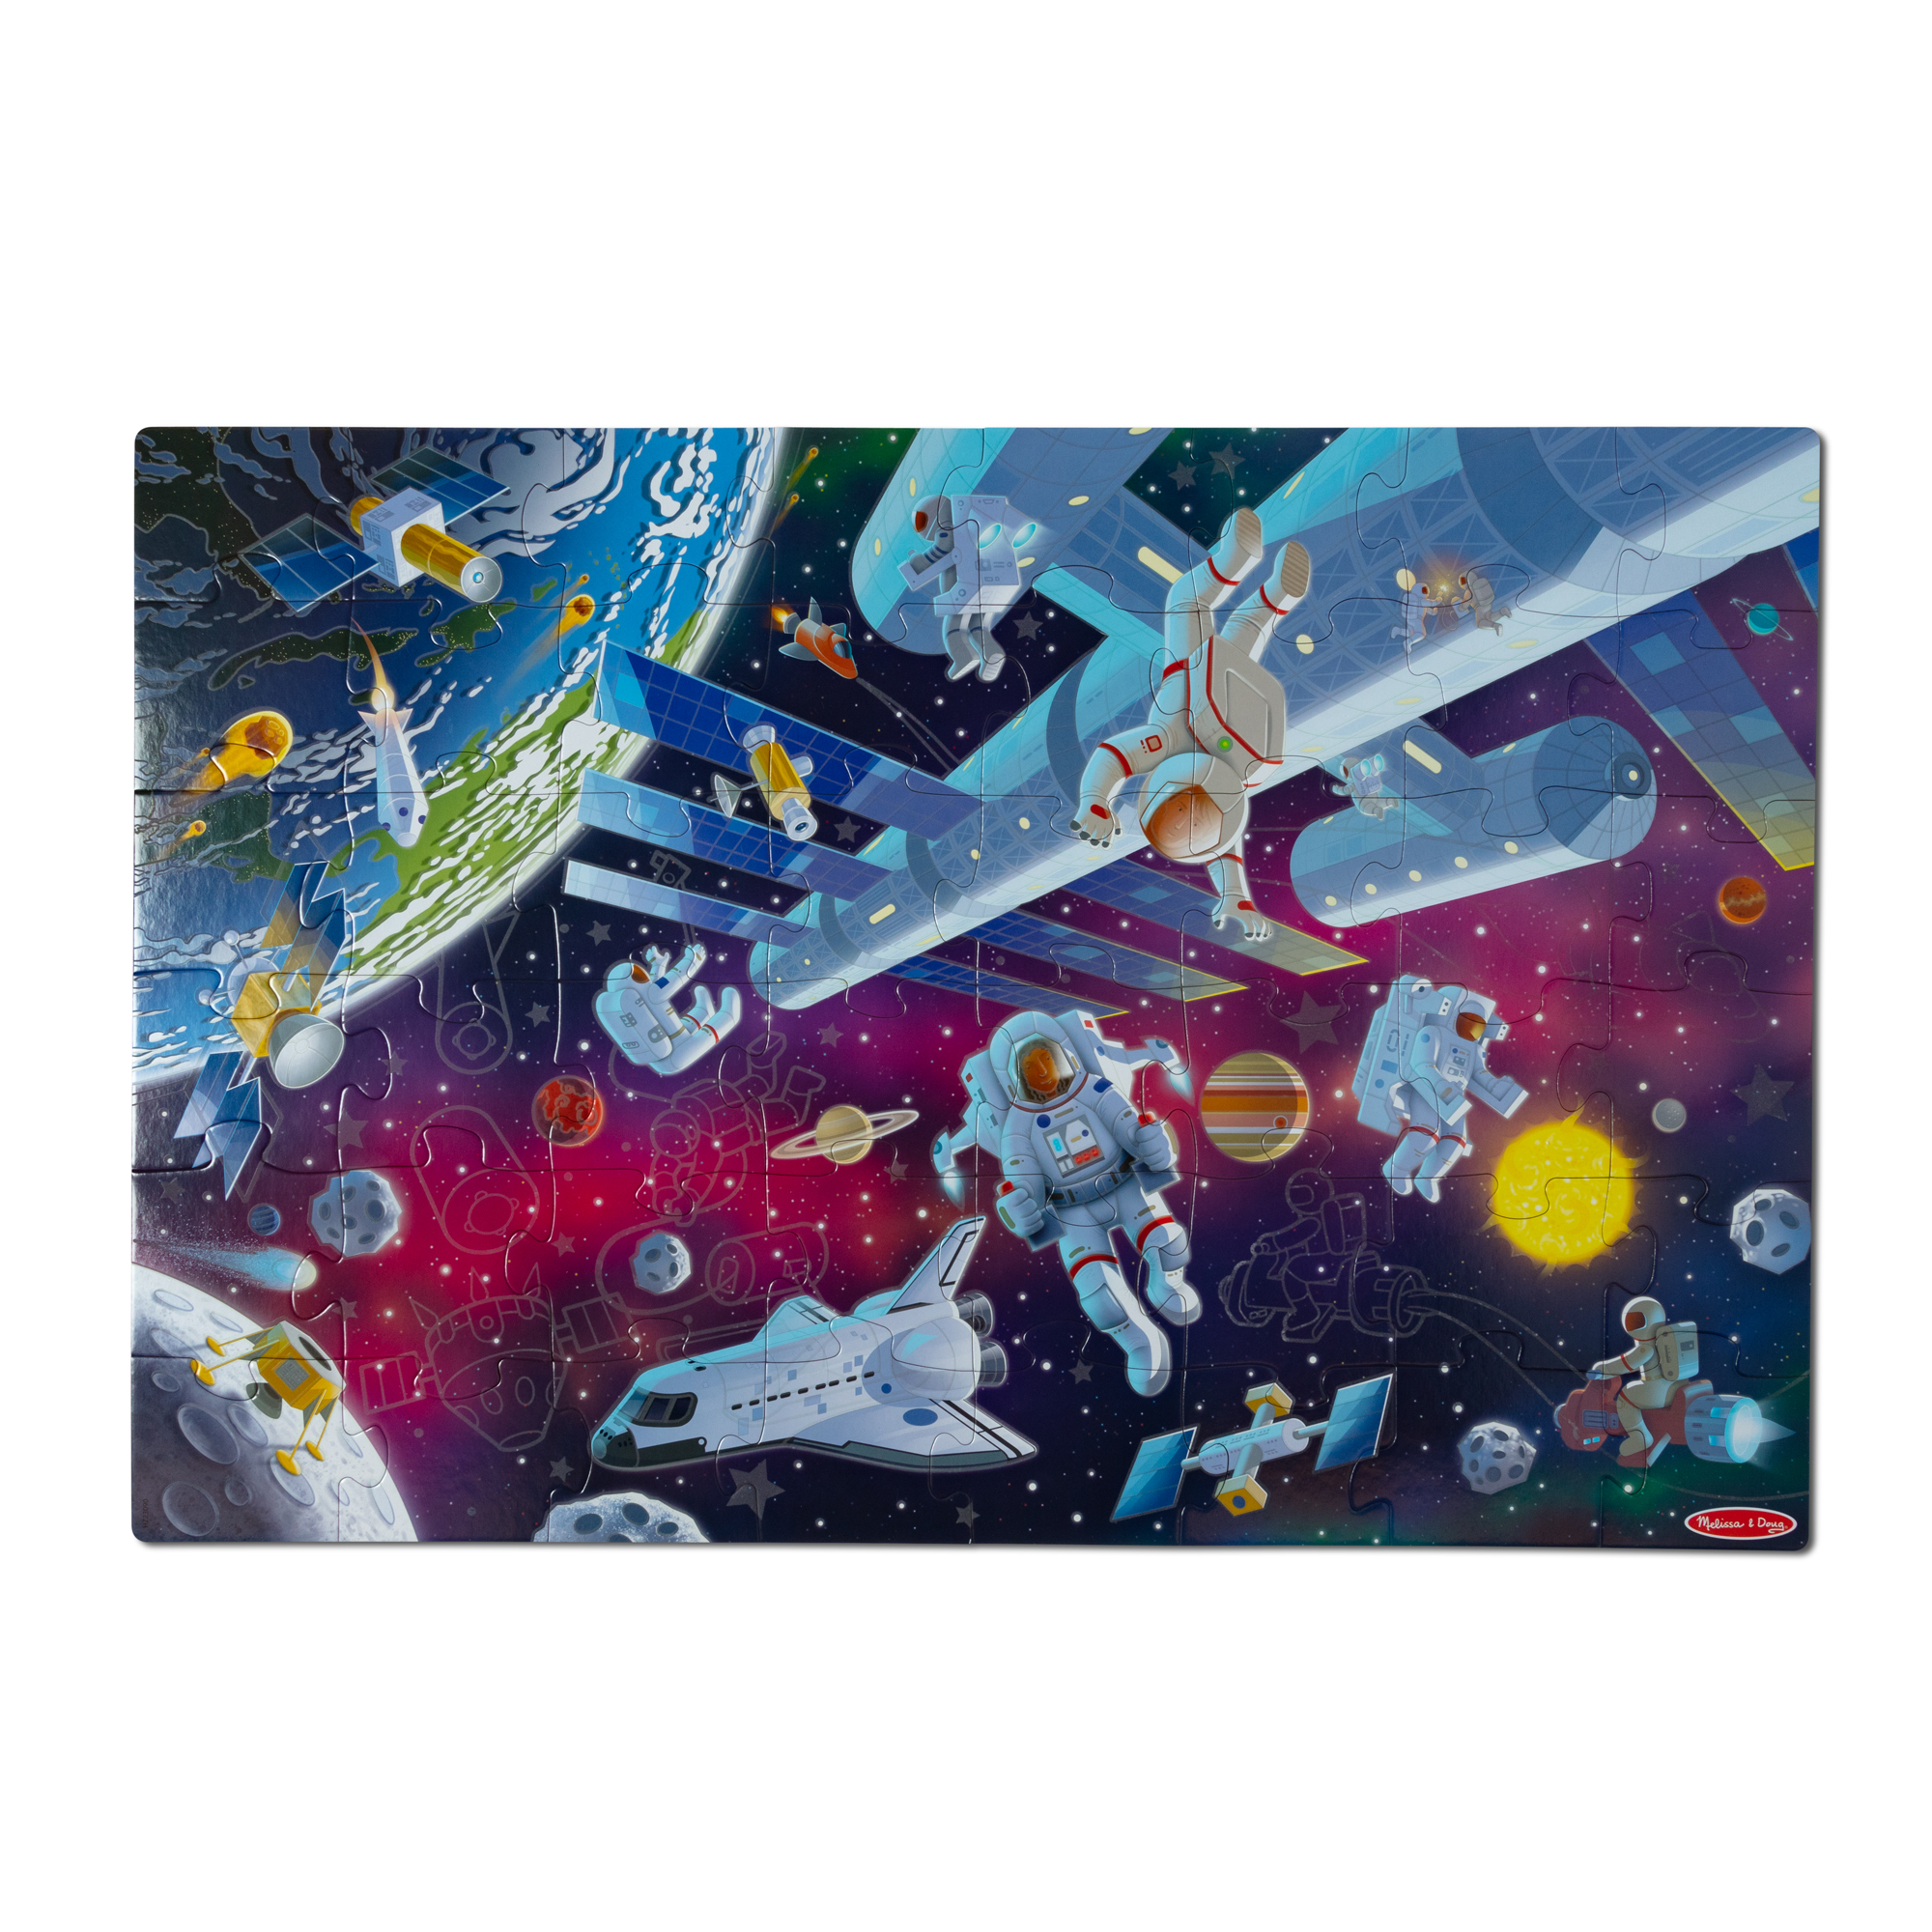 Outer Space Pouch Puzzle - Mildred & Dildred